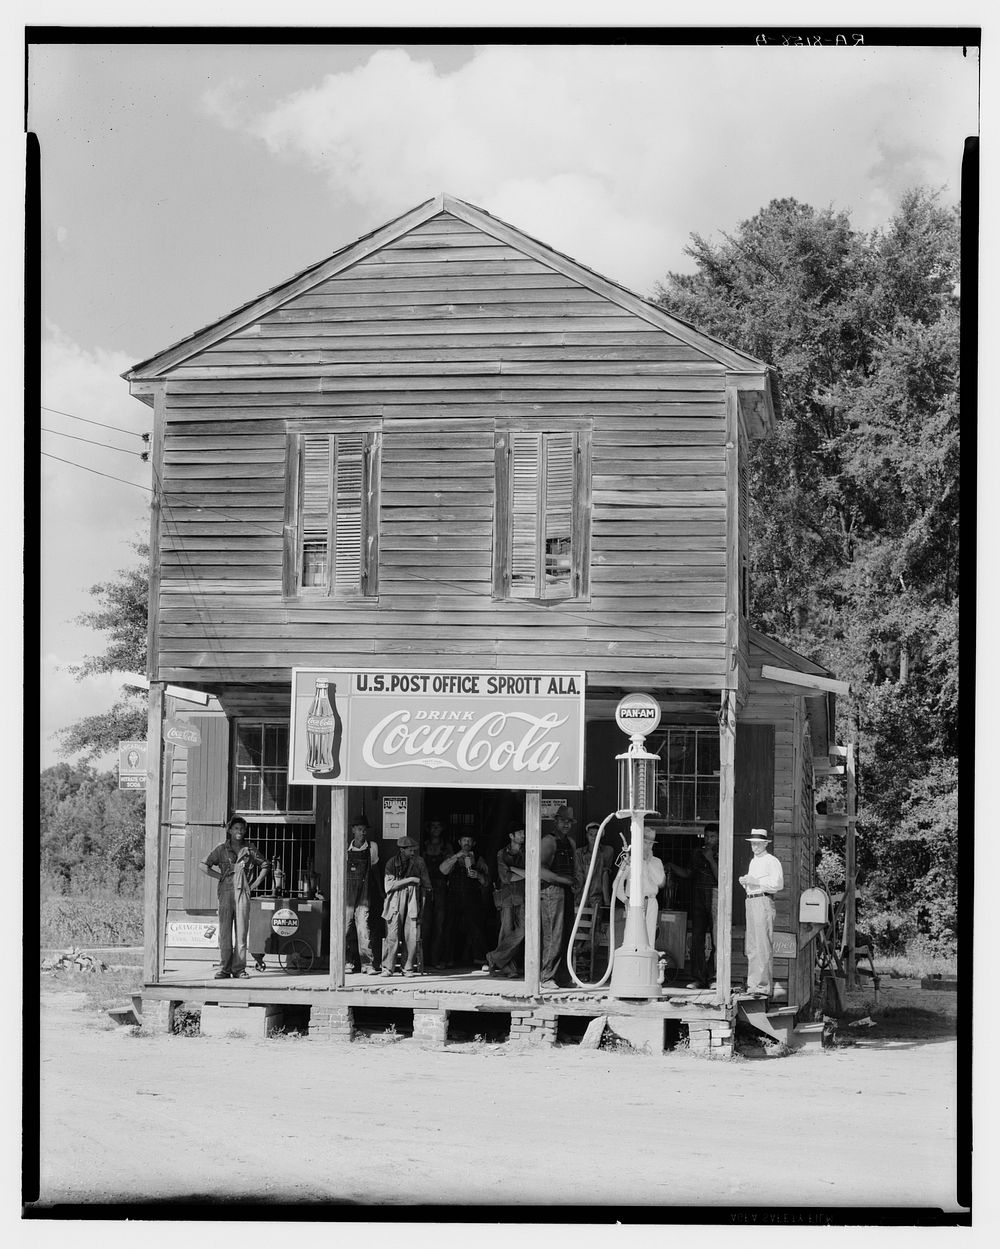 Crossroads store. Sprott, Alabama. Sourced from the Library of Congress.